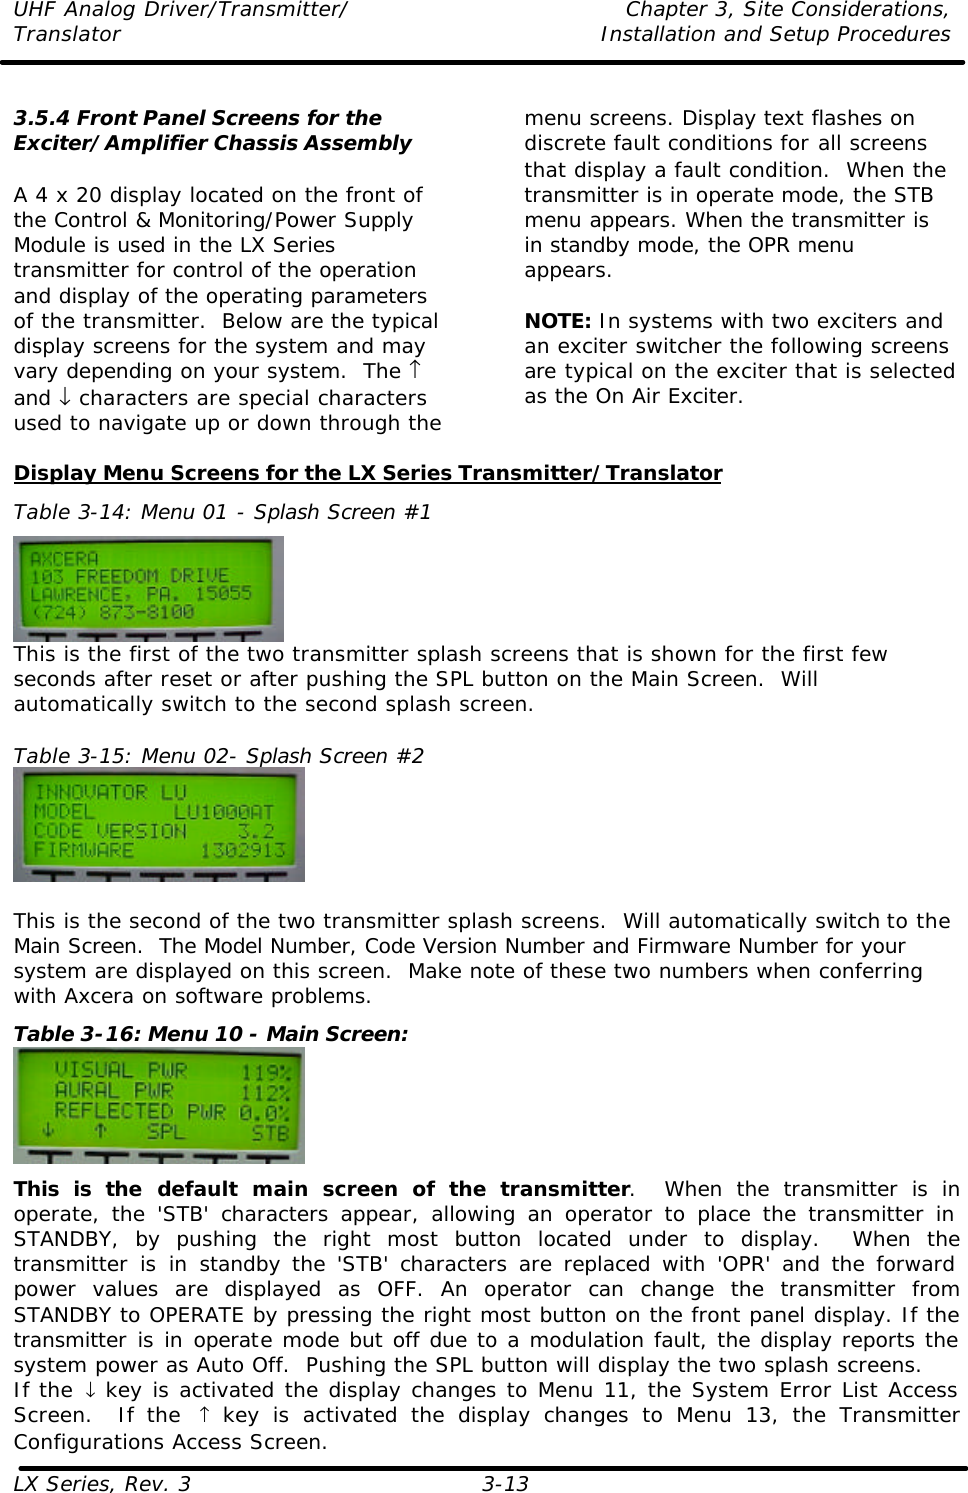 UHF Analog Driver/Transmitter/ Chapter 3, Site Considerations,  Translator Installation and Setup Procedures LX Series, Rev. 3 3-13  3.5.4 Front Panel Screens for the Exciter/Amplifier Chassis Assembly  A 4 x 20 display located on the front of the Control &amp; Monitoring/Power Supply Module is used in the LX Series transmitter for control of the operation and display of the operating parameters of the transmitter.  Below are the typical display screens for the system and may vary depending on your system.  The ↑ and ↓ characters are special characters used to navigate up or down through the menu screens. Display text flashes on discrete fault conditions for all screens that display a fault condition.  When the transmitter is in operate mode, the STB menu appears. When the transmitter is in standby mode, the OPR menu appears.  NOTE: In systems with two exciters and an exciter switcher the following screens are typical on the exciter that is selected as the On Air Exciter.   Display Menu Screens for the LX Series Transmitter/Translator Table 3-14: Menu 01 - Splash Screen #1  This is the first of the two transmitter splash screens that is shown for the first few seconds after reset or after pushing the SPL button on the Main Screen.  Will automatically switch to the second splash screen.  Table 3-15: Menu 02- Splash Screen #2   This is the second of the two transmitter splash screens.  Will automatically switch to the Main Screen.  The Model Number, Code Version Number and Firmware Number for your system are displayed on this screen.  Make note of these two numbers when conferring with Axcera on software problems. Table 3-16: Menu 10 - Main Screen:  This is the default main screen of the transmitter.  When the transmitter is in operate, the &apos;STB&apos; characters appear, allowing an operator to place the transmitter in STANDBY, by pushing the right most button located under to display.  When the transmitter is in standby the &apos;STB&apos; characters are replaced with &apos;OPR&apos; and the forward power values are displayed as OFF. An operator can change the transmitter from STANDBY to OPERATE by pressing the right most button on the front panel display. If the transmitter is in operate mode but off due to a modulation fault, the display reports the system power as Auto Off.  Pushing the SPL button will display the two splash screens. If the ↓ key is activated the display changes to Menu 11, the System Error List Access Screen.  If the  ↑ key is activated the display changes to Menu 13, the Transmitter Configurations Access Screen. 